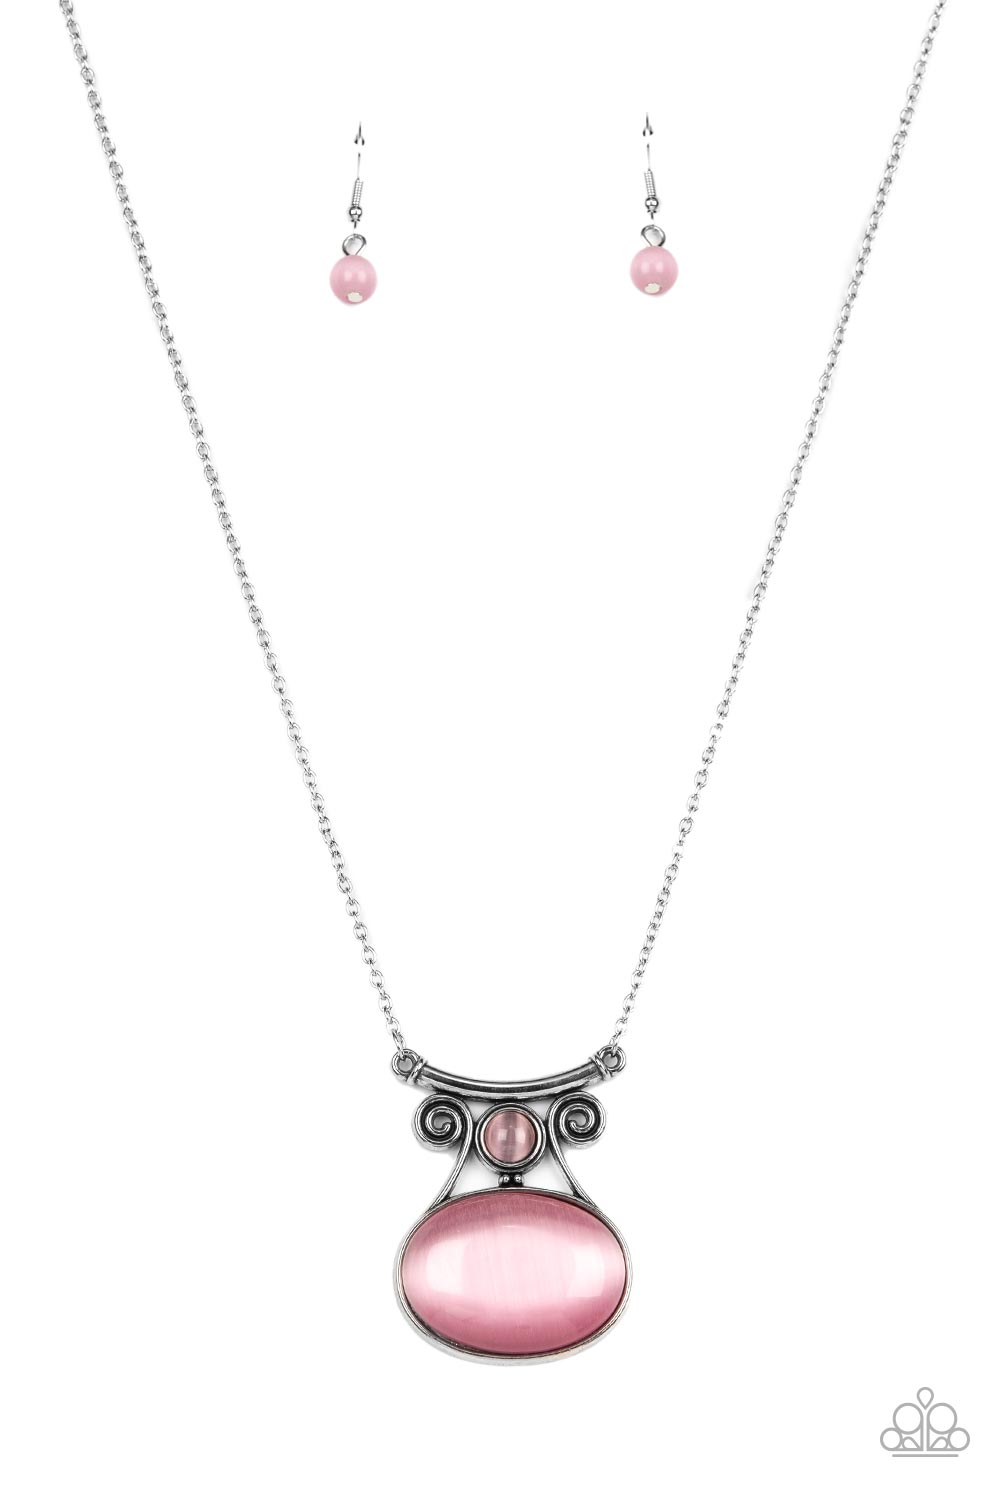 One DAYDREAM At A Time Pink Necklace - Paparazzi Accessories  An oversized Pale Rosette cat's eye stone embellishes the bottom of a swirly silver frame dotted with a dainty Pale Rosette cat's eye stone accent. Attached to a bowing silver bar, the ethereal pendant swings from the bottom of an extended silver chain for an enchanting fashion. Features an adjustable clasp closure.  Sold as one individual necklace. Includes one pair of matching earrings.